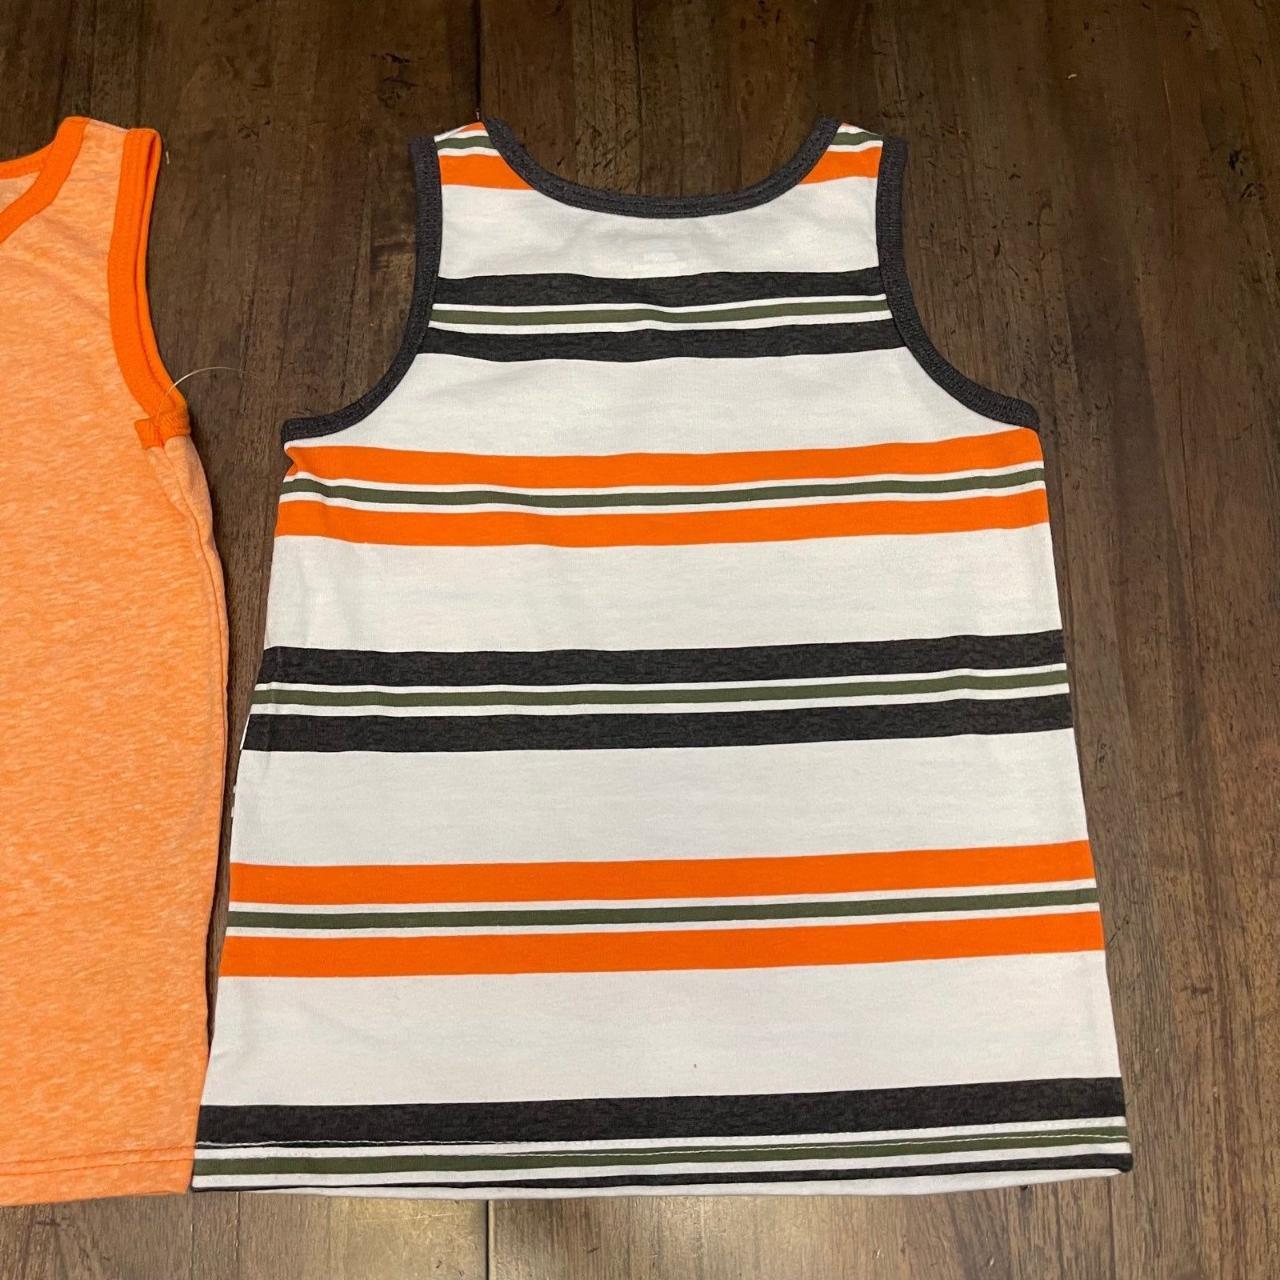 Product Image 2 - 2 Tanks SIZE 4T

New with